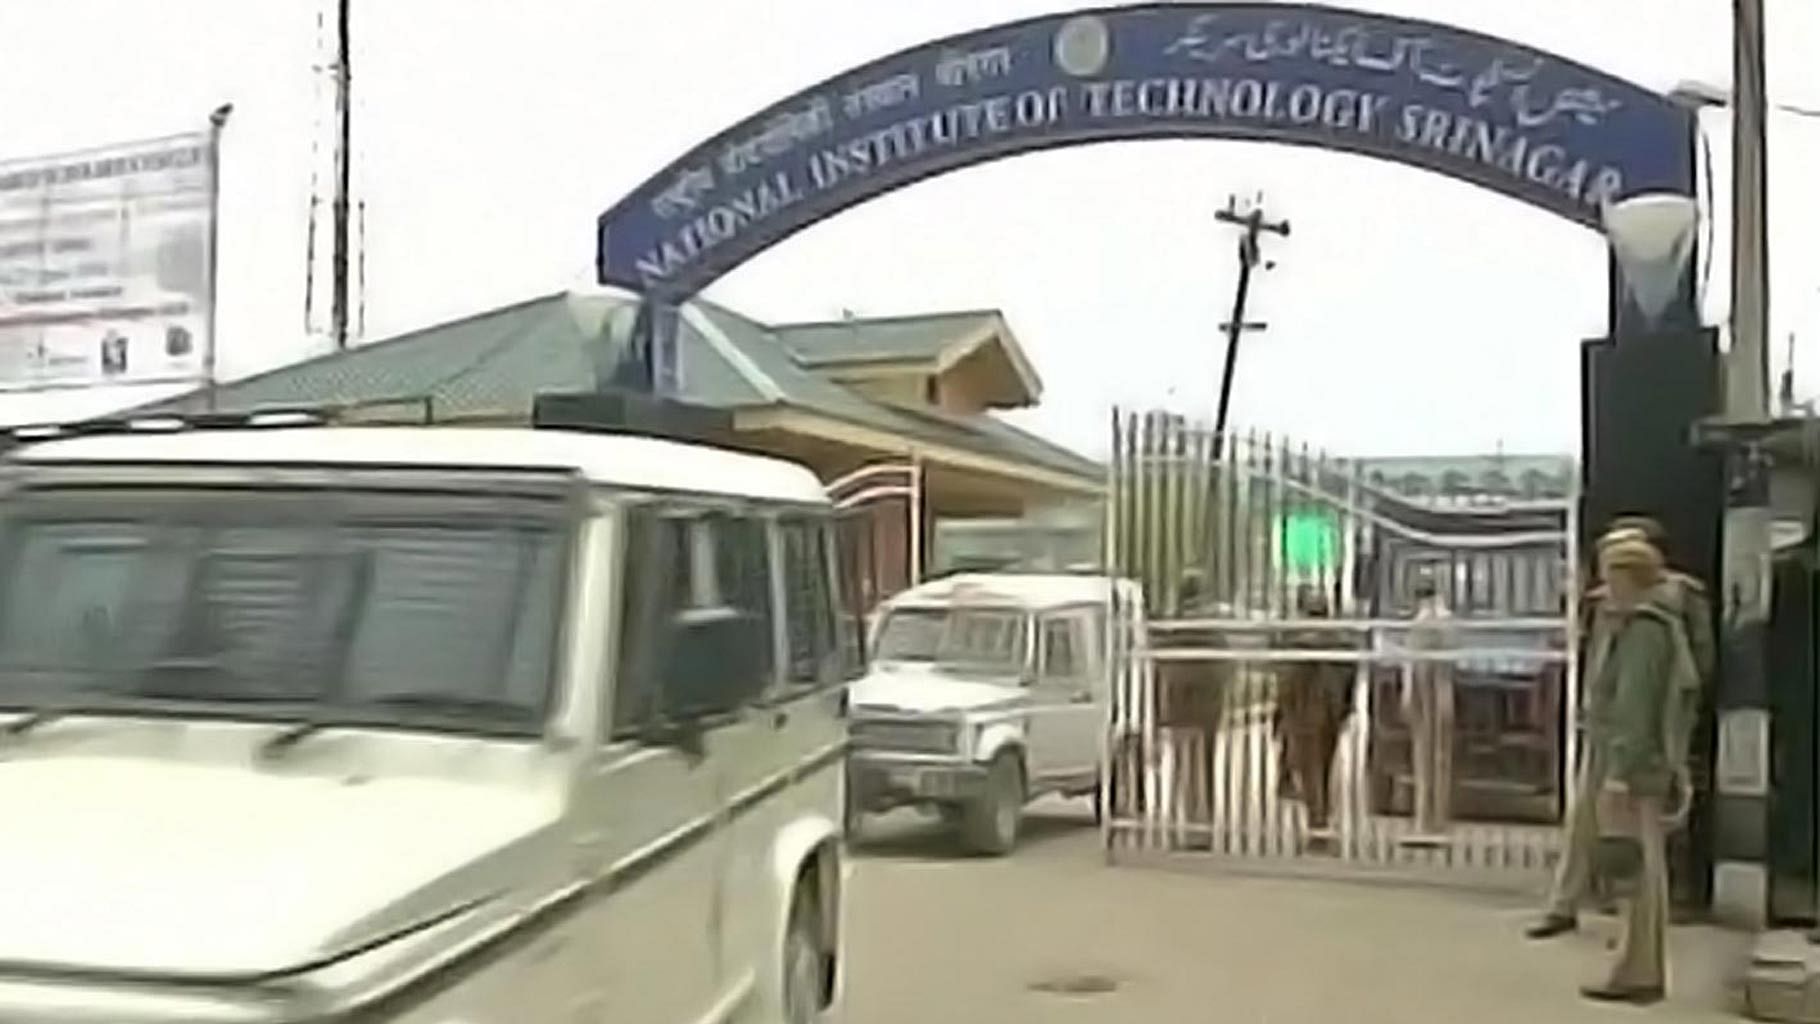 Vehicles of security forces at the campus. (Photo Courtesy: ANI)